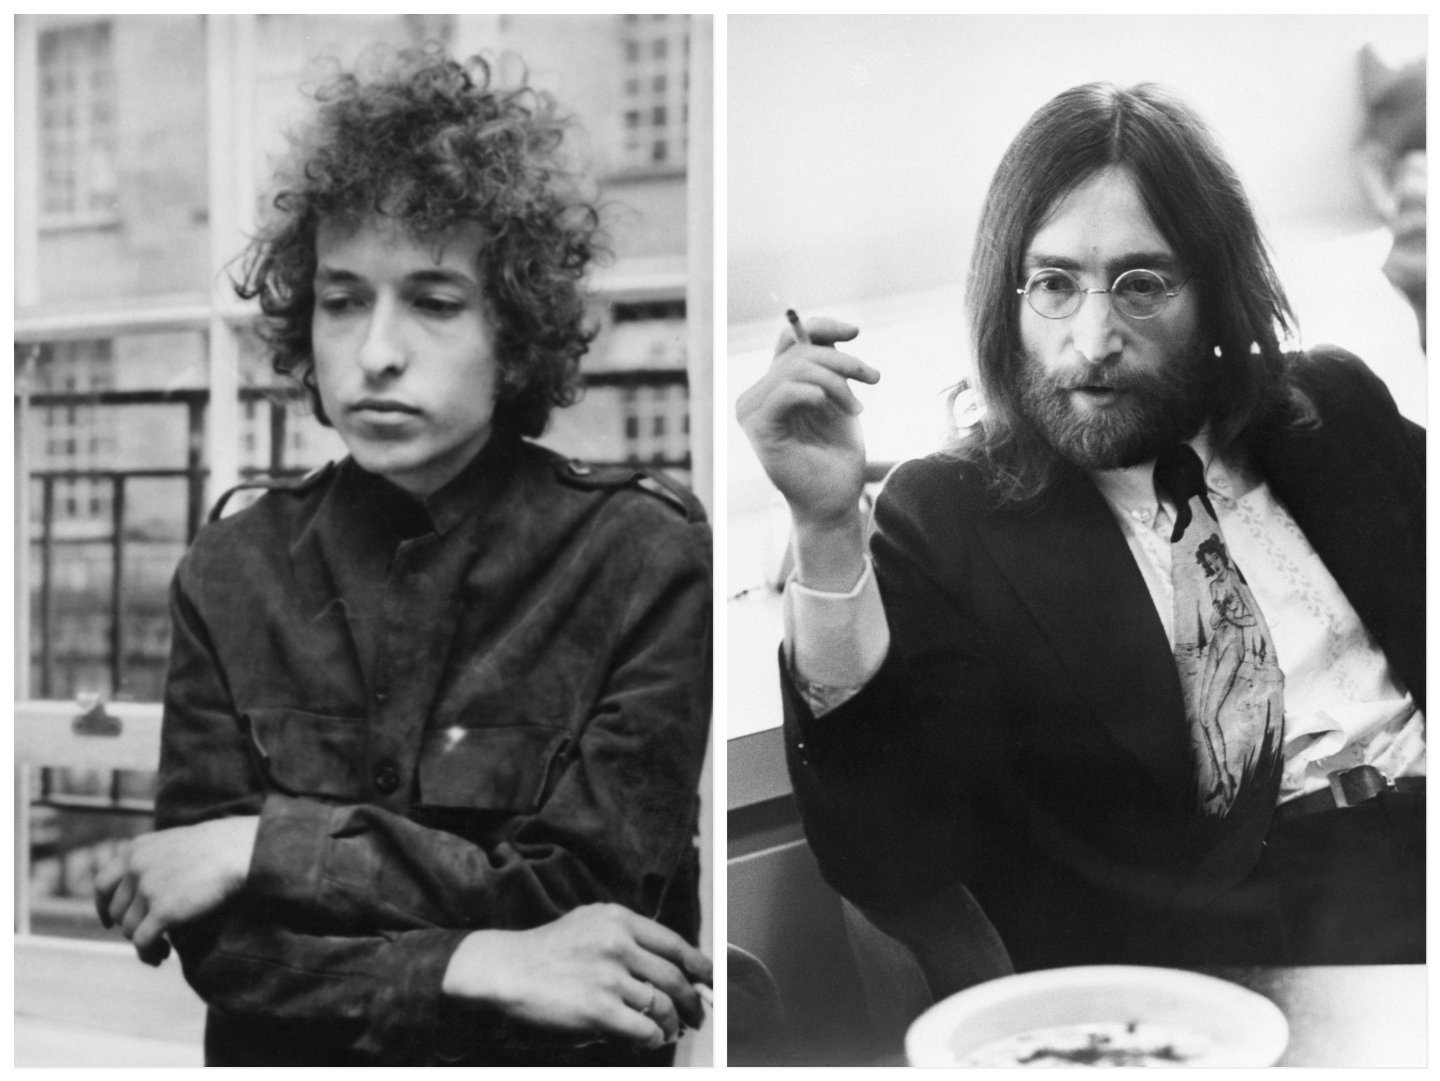 A black and white picture of Bob Dylan standing with his arms folded, holding a cigarette. John Lennon sits and smokes a cigarette.